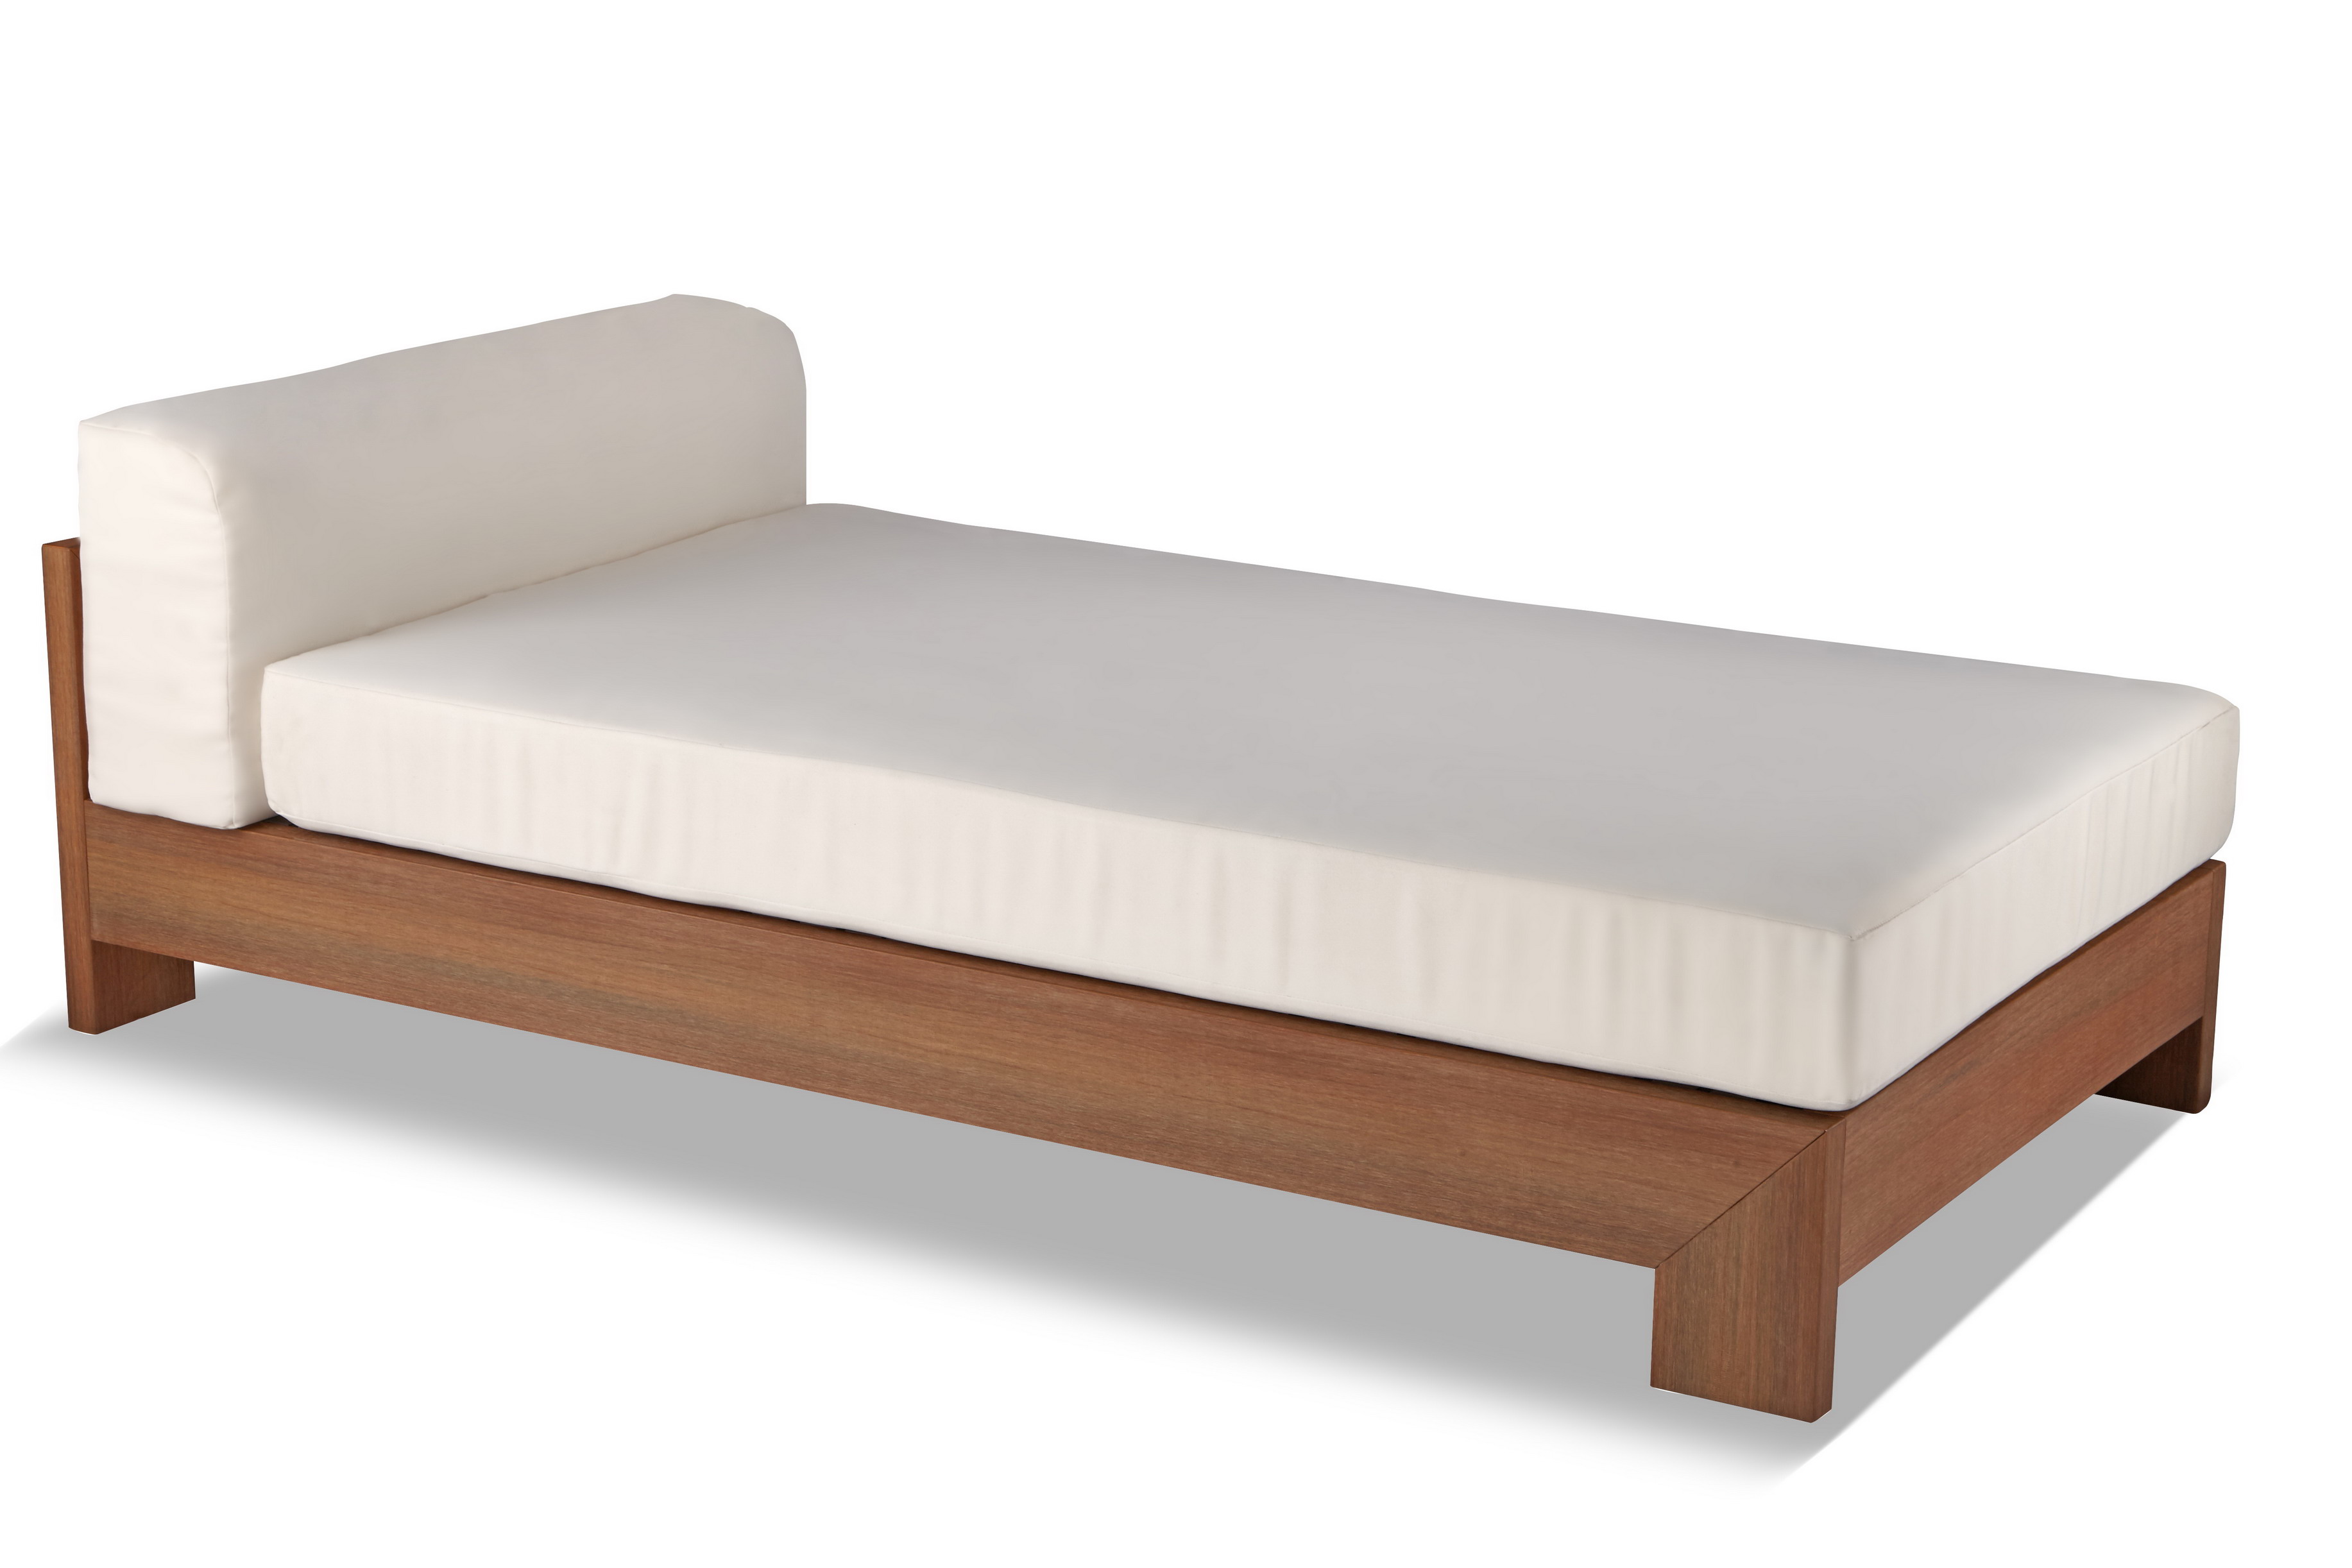 Low price Outdoor Furniture Polywood Chaise supplier(s) china